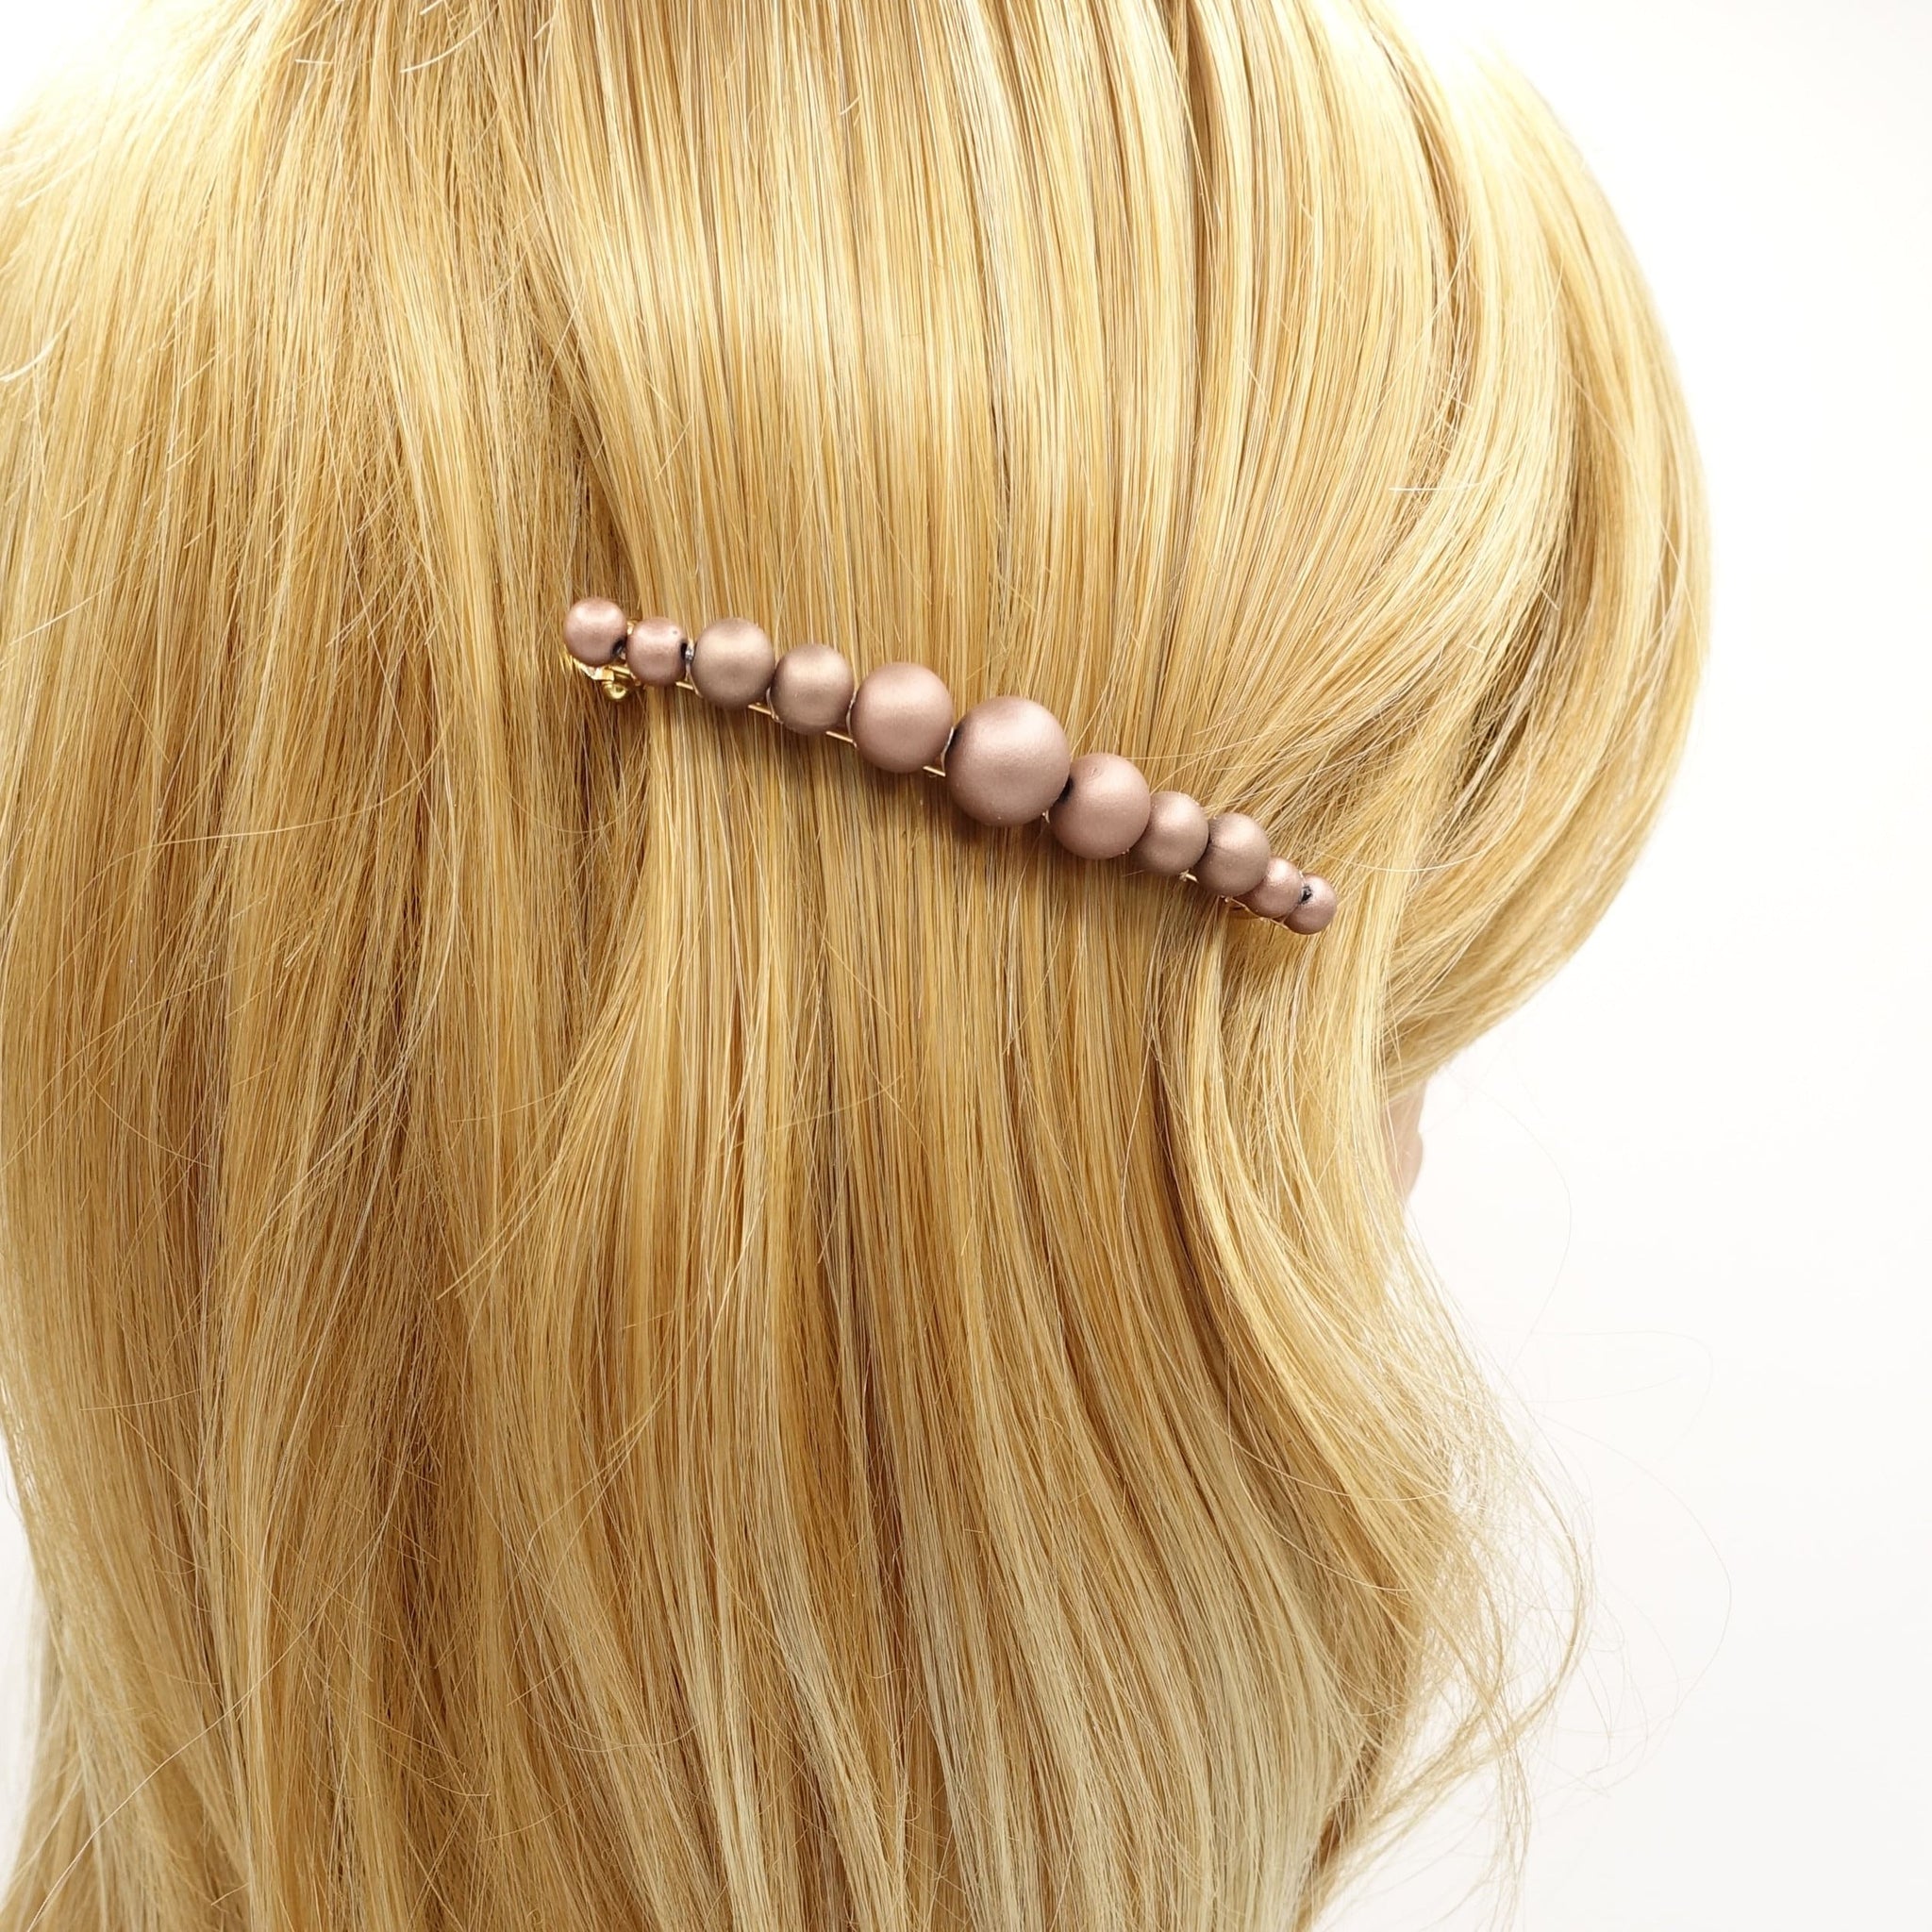 VeryShine Hair Clip graduated ball hair barrette matte color ball embellished hair accessory for women